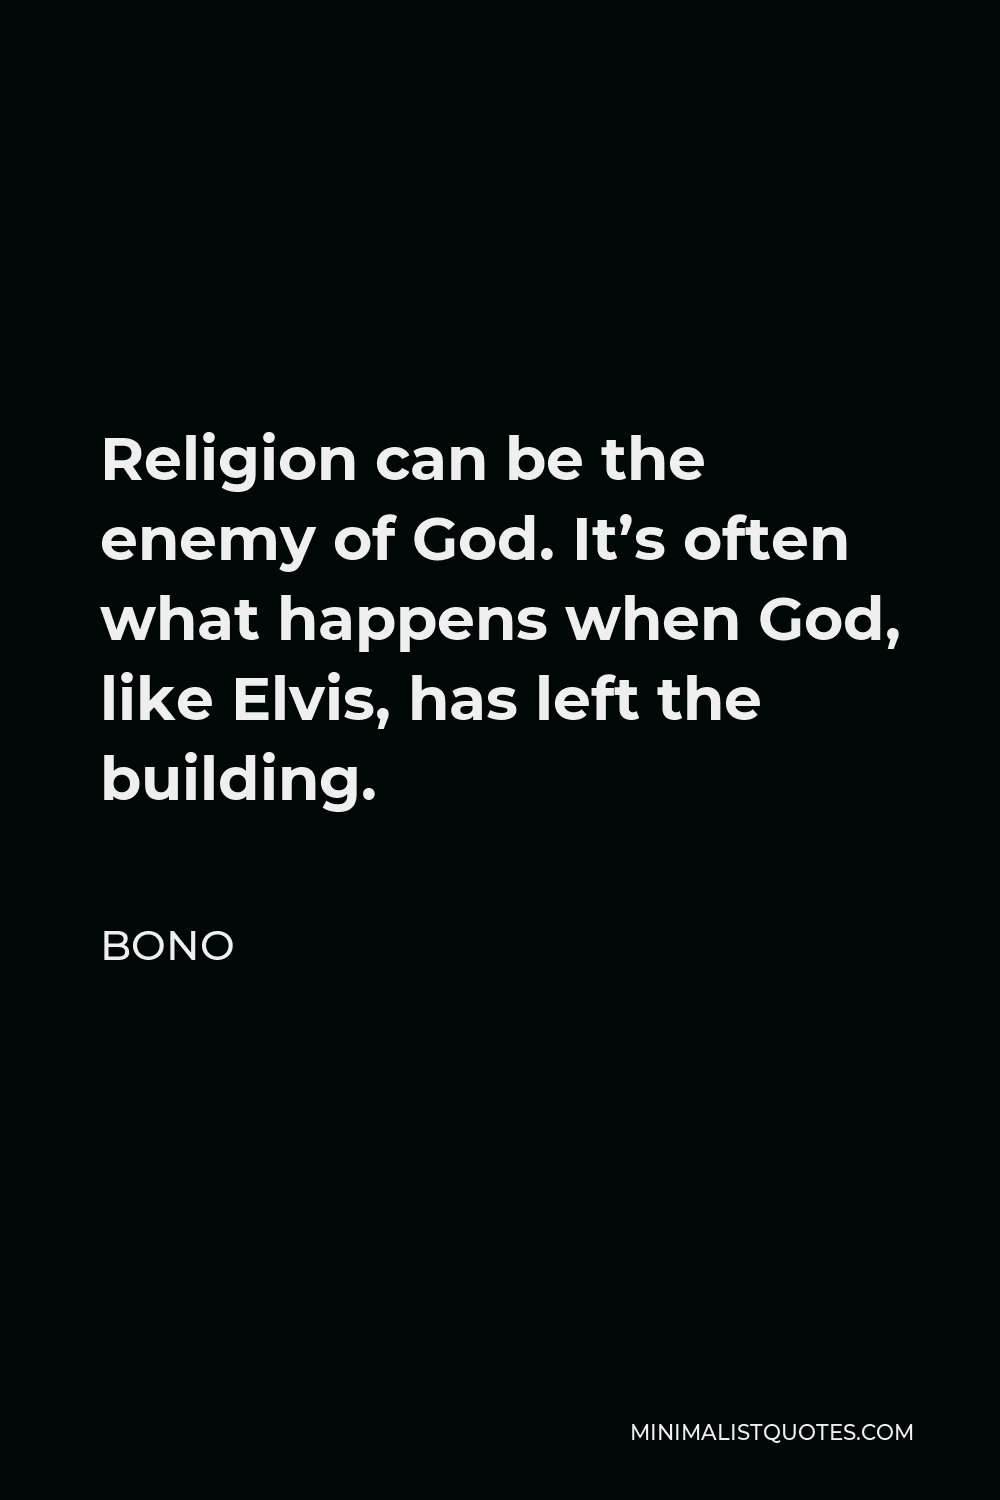 Bono Quote - Religion can be the enemy of God. It’s often what happens when God, like Elvis, has left the building.